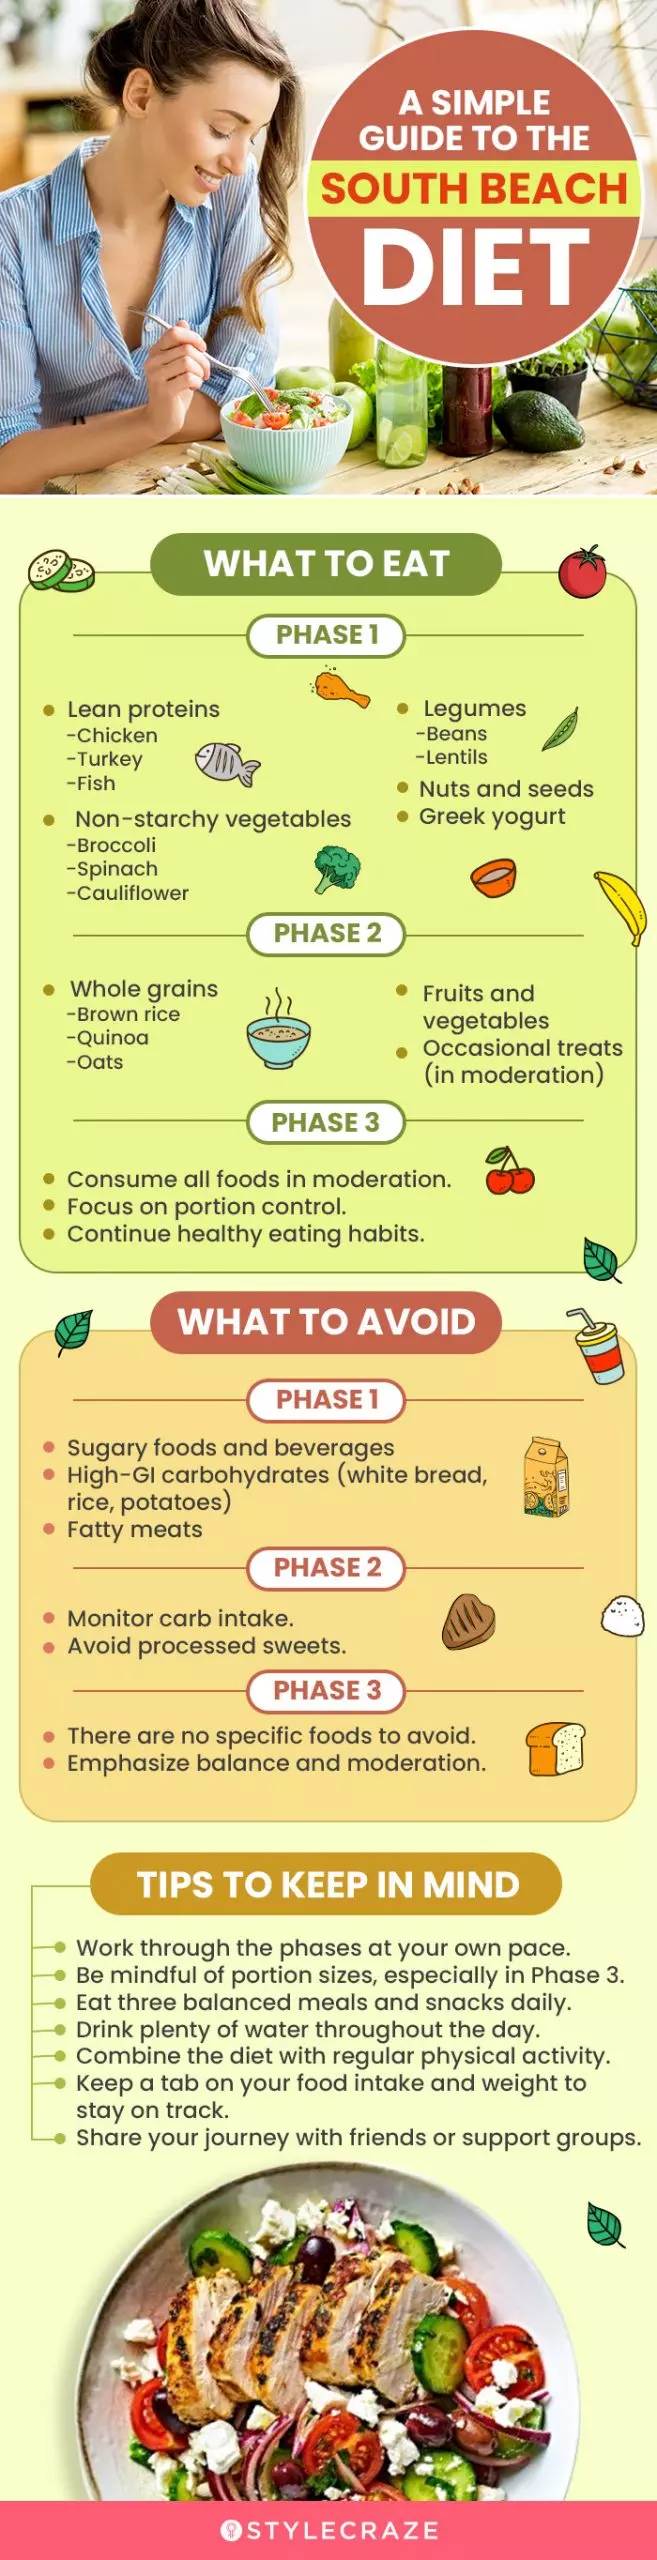 a simple guide to the south beach diet (infographic)